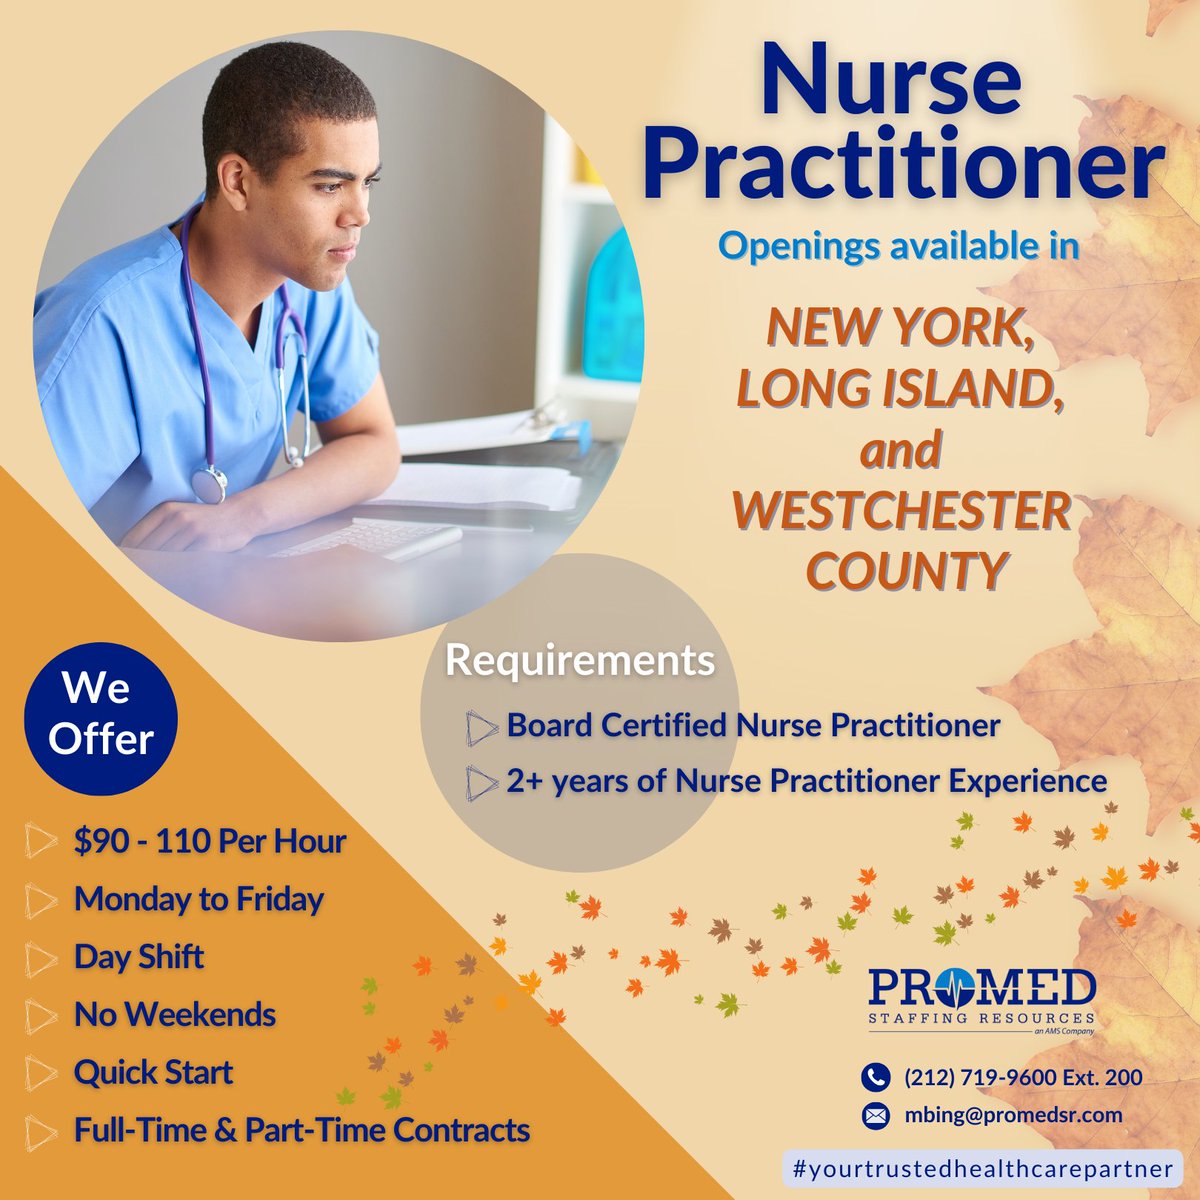 Boost your #nursingcareer with ProMed Staffing Resources! To apply, send an email to mbing@promedsr.com or dial (212) 719-9600 EXT. 200
 
#nursepractitioner #np #npjobs #fulltime #parttime #healthcareprofessionals #hiring #hiringnow  #promedsr #yourtrustedhealthcarepartner